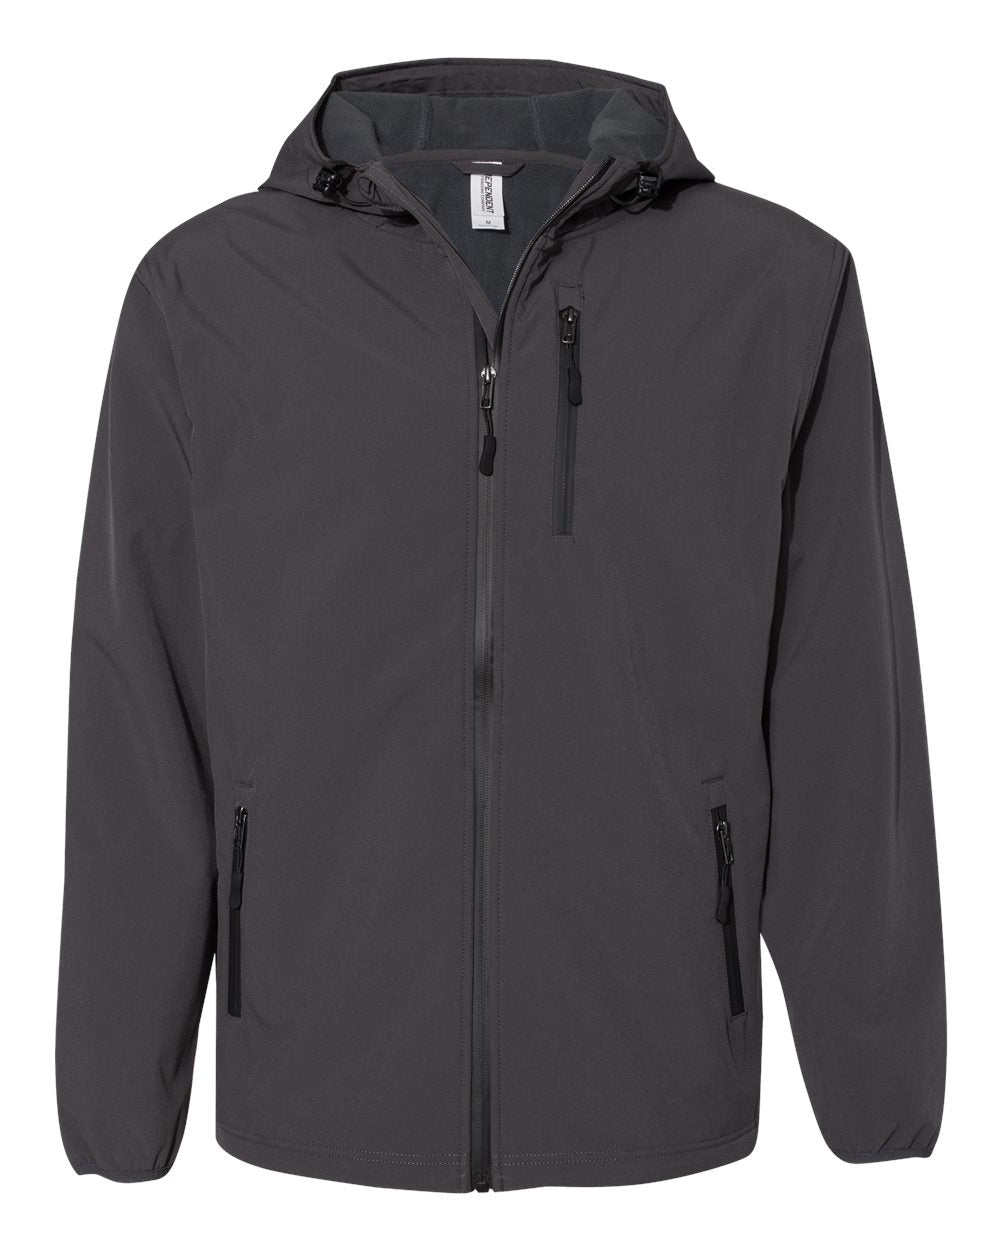 Independent Trading Co. - Poly-Tech Soft Shell Jacket